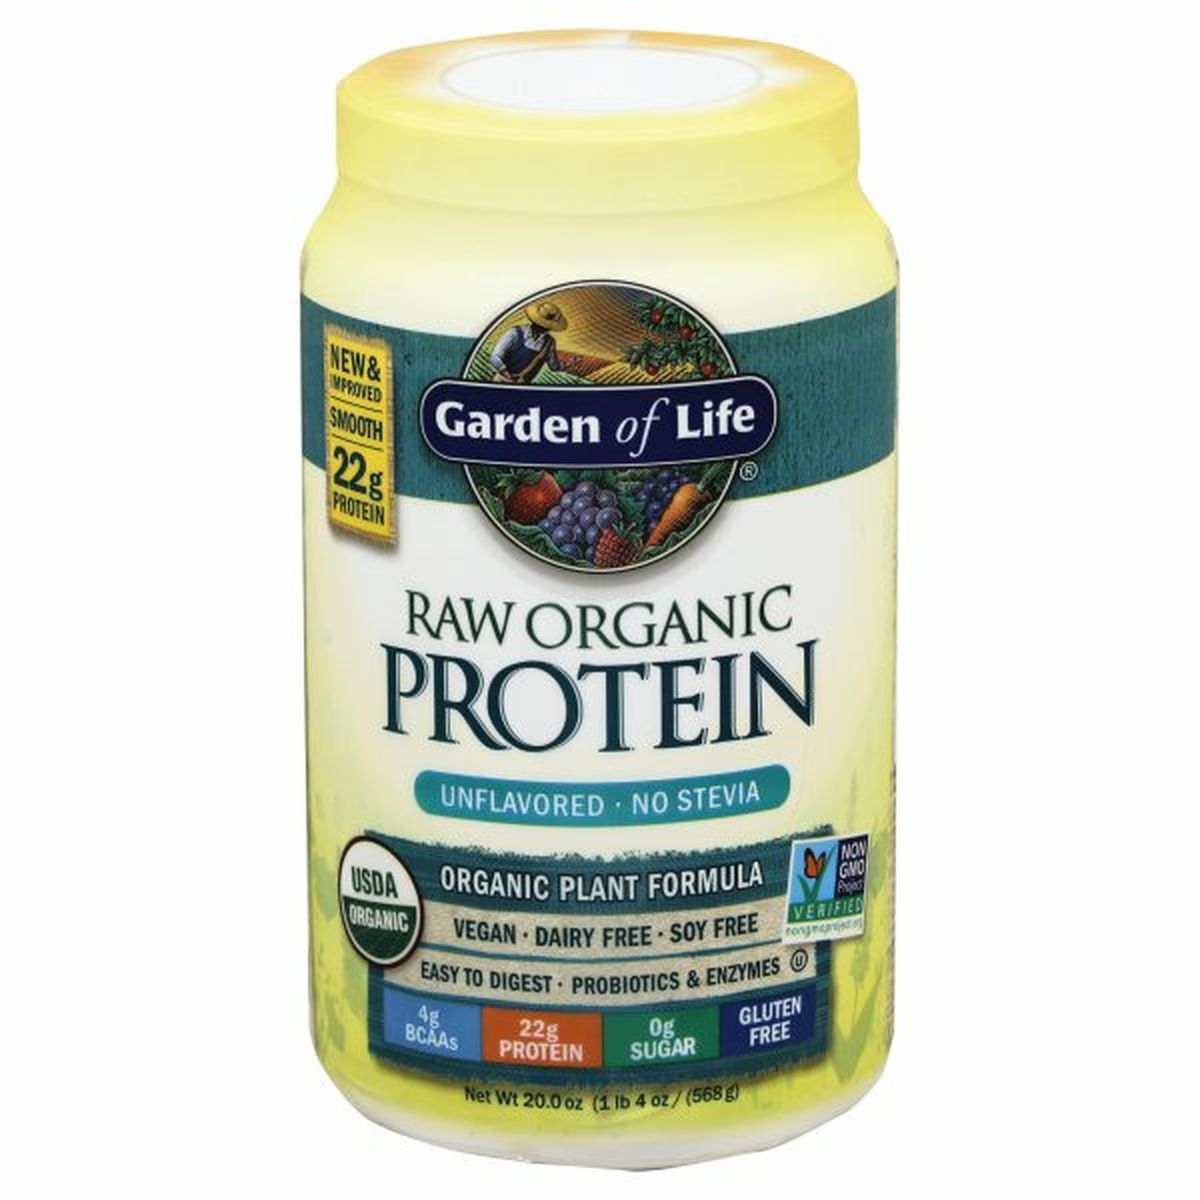 Calories in Garden of Life Protein, Raw Organic, Unflavored